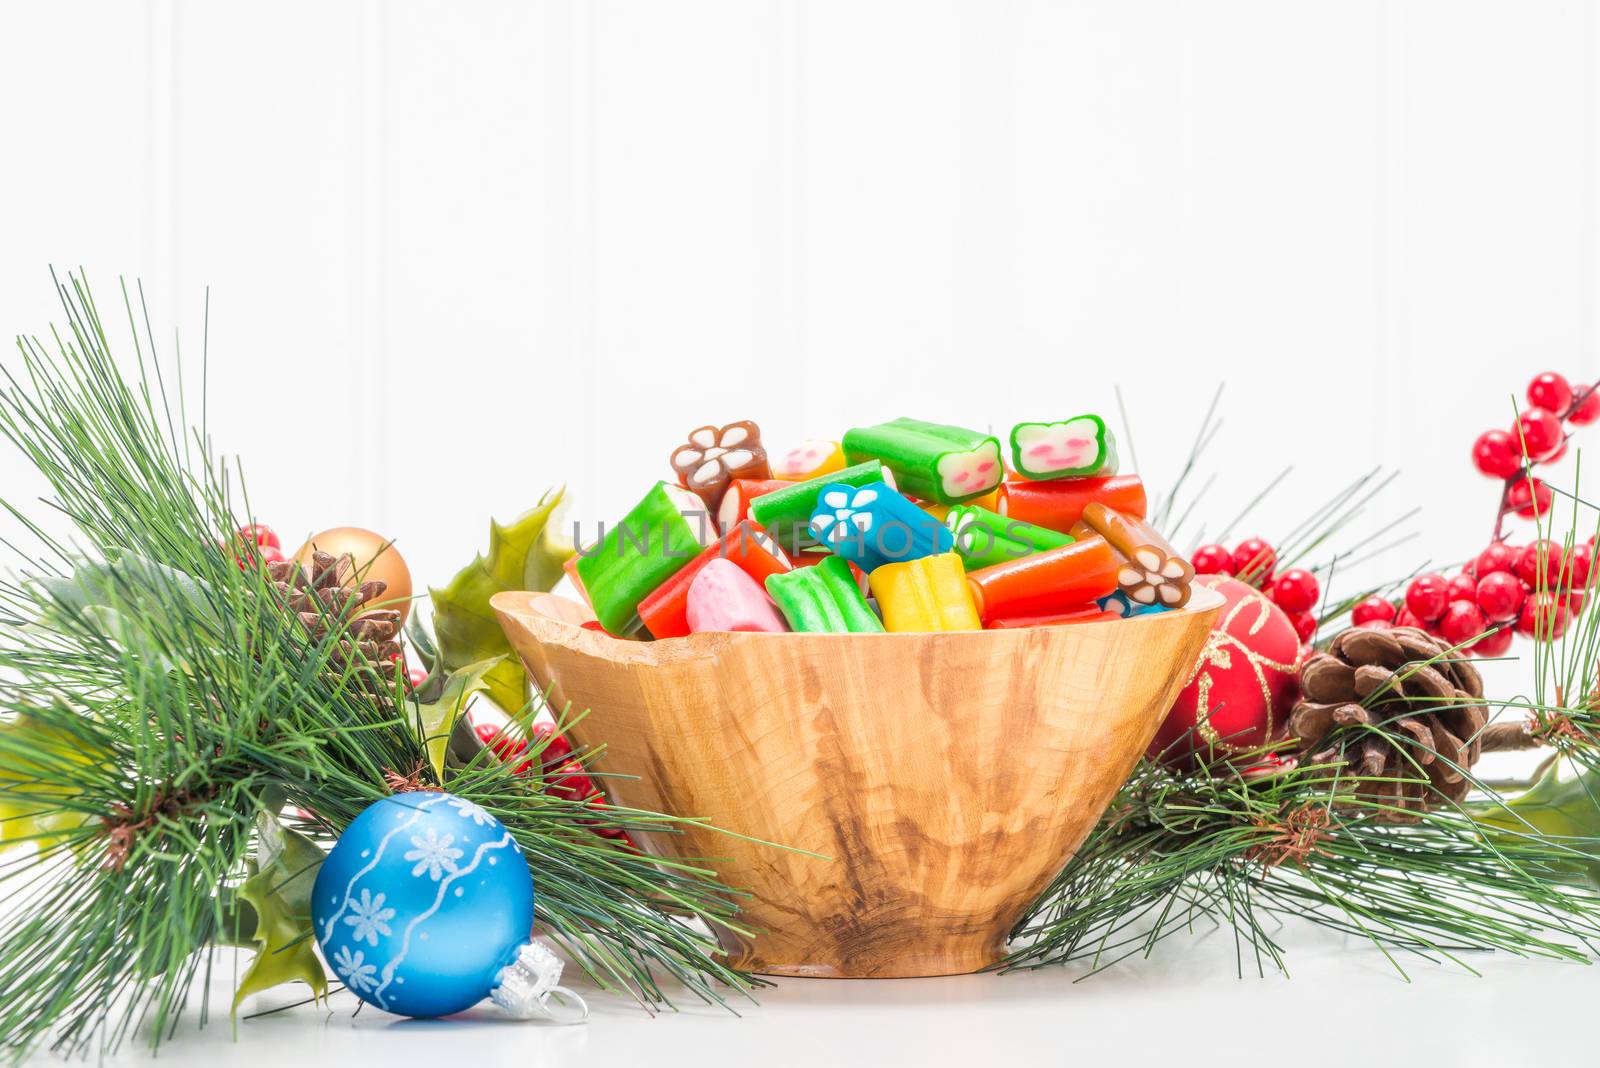 Colorful Seasonal Candy Bowl by billberryphotography